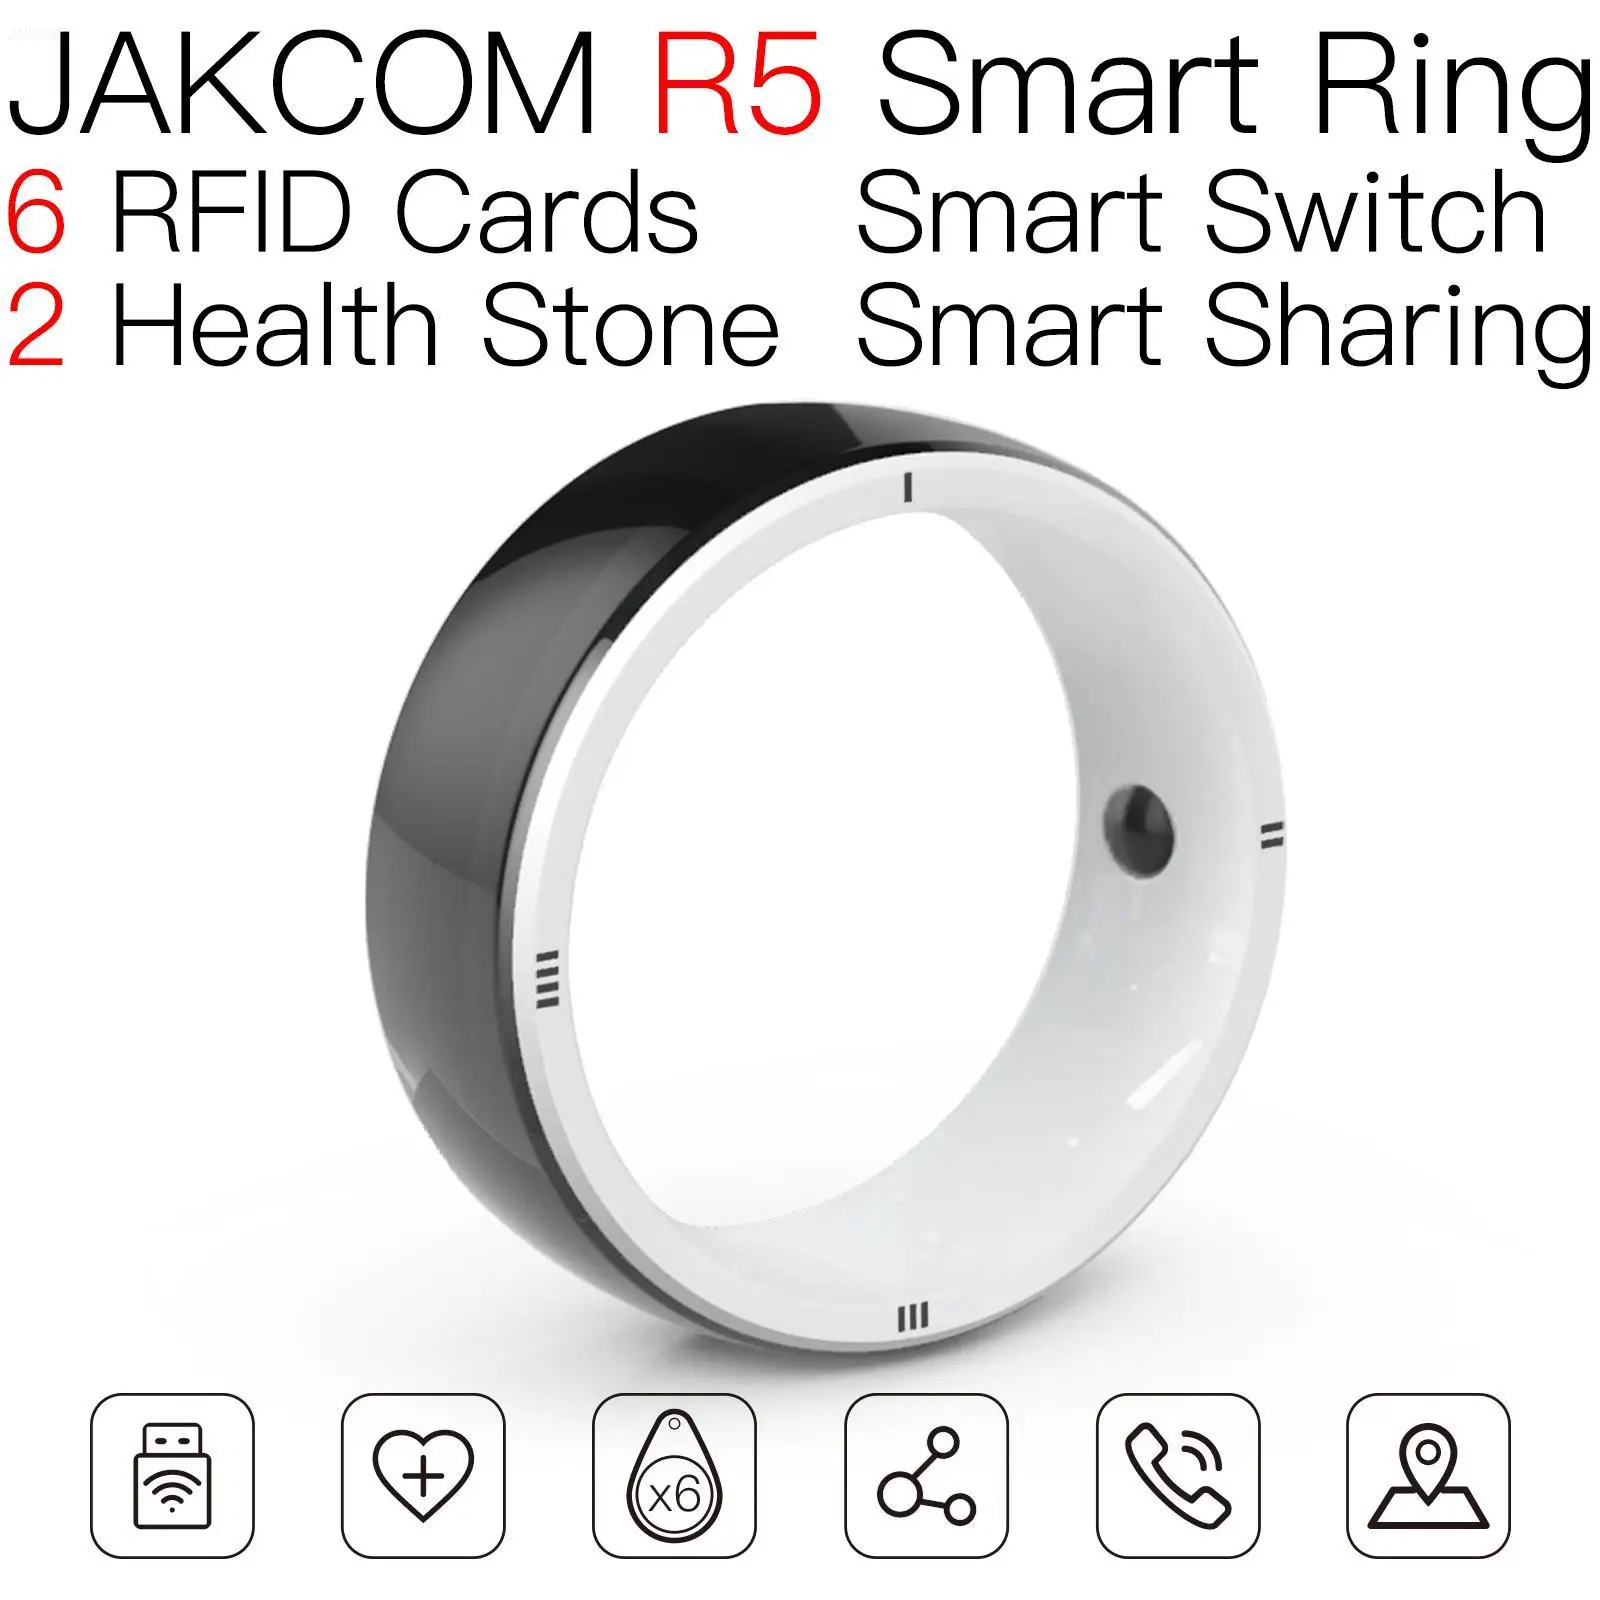 

JAKCOM R5 Smart Ring Super value than smart nfc chip rfid metal uhf ic plastic 9662 business cards create content opportunities